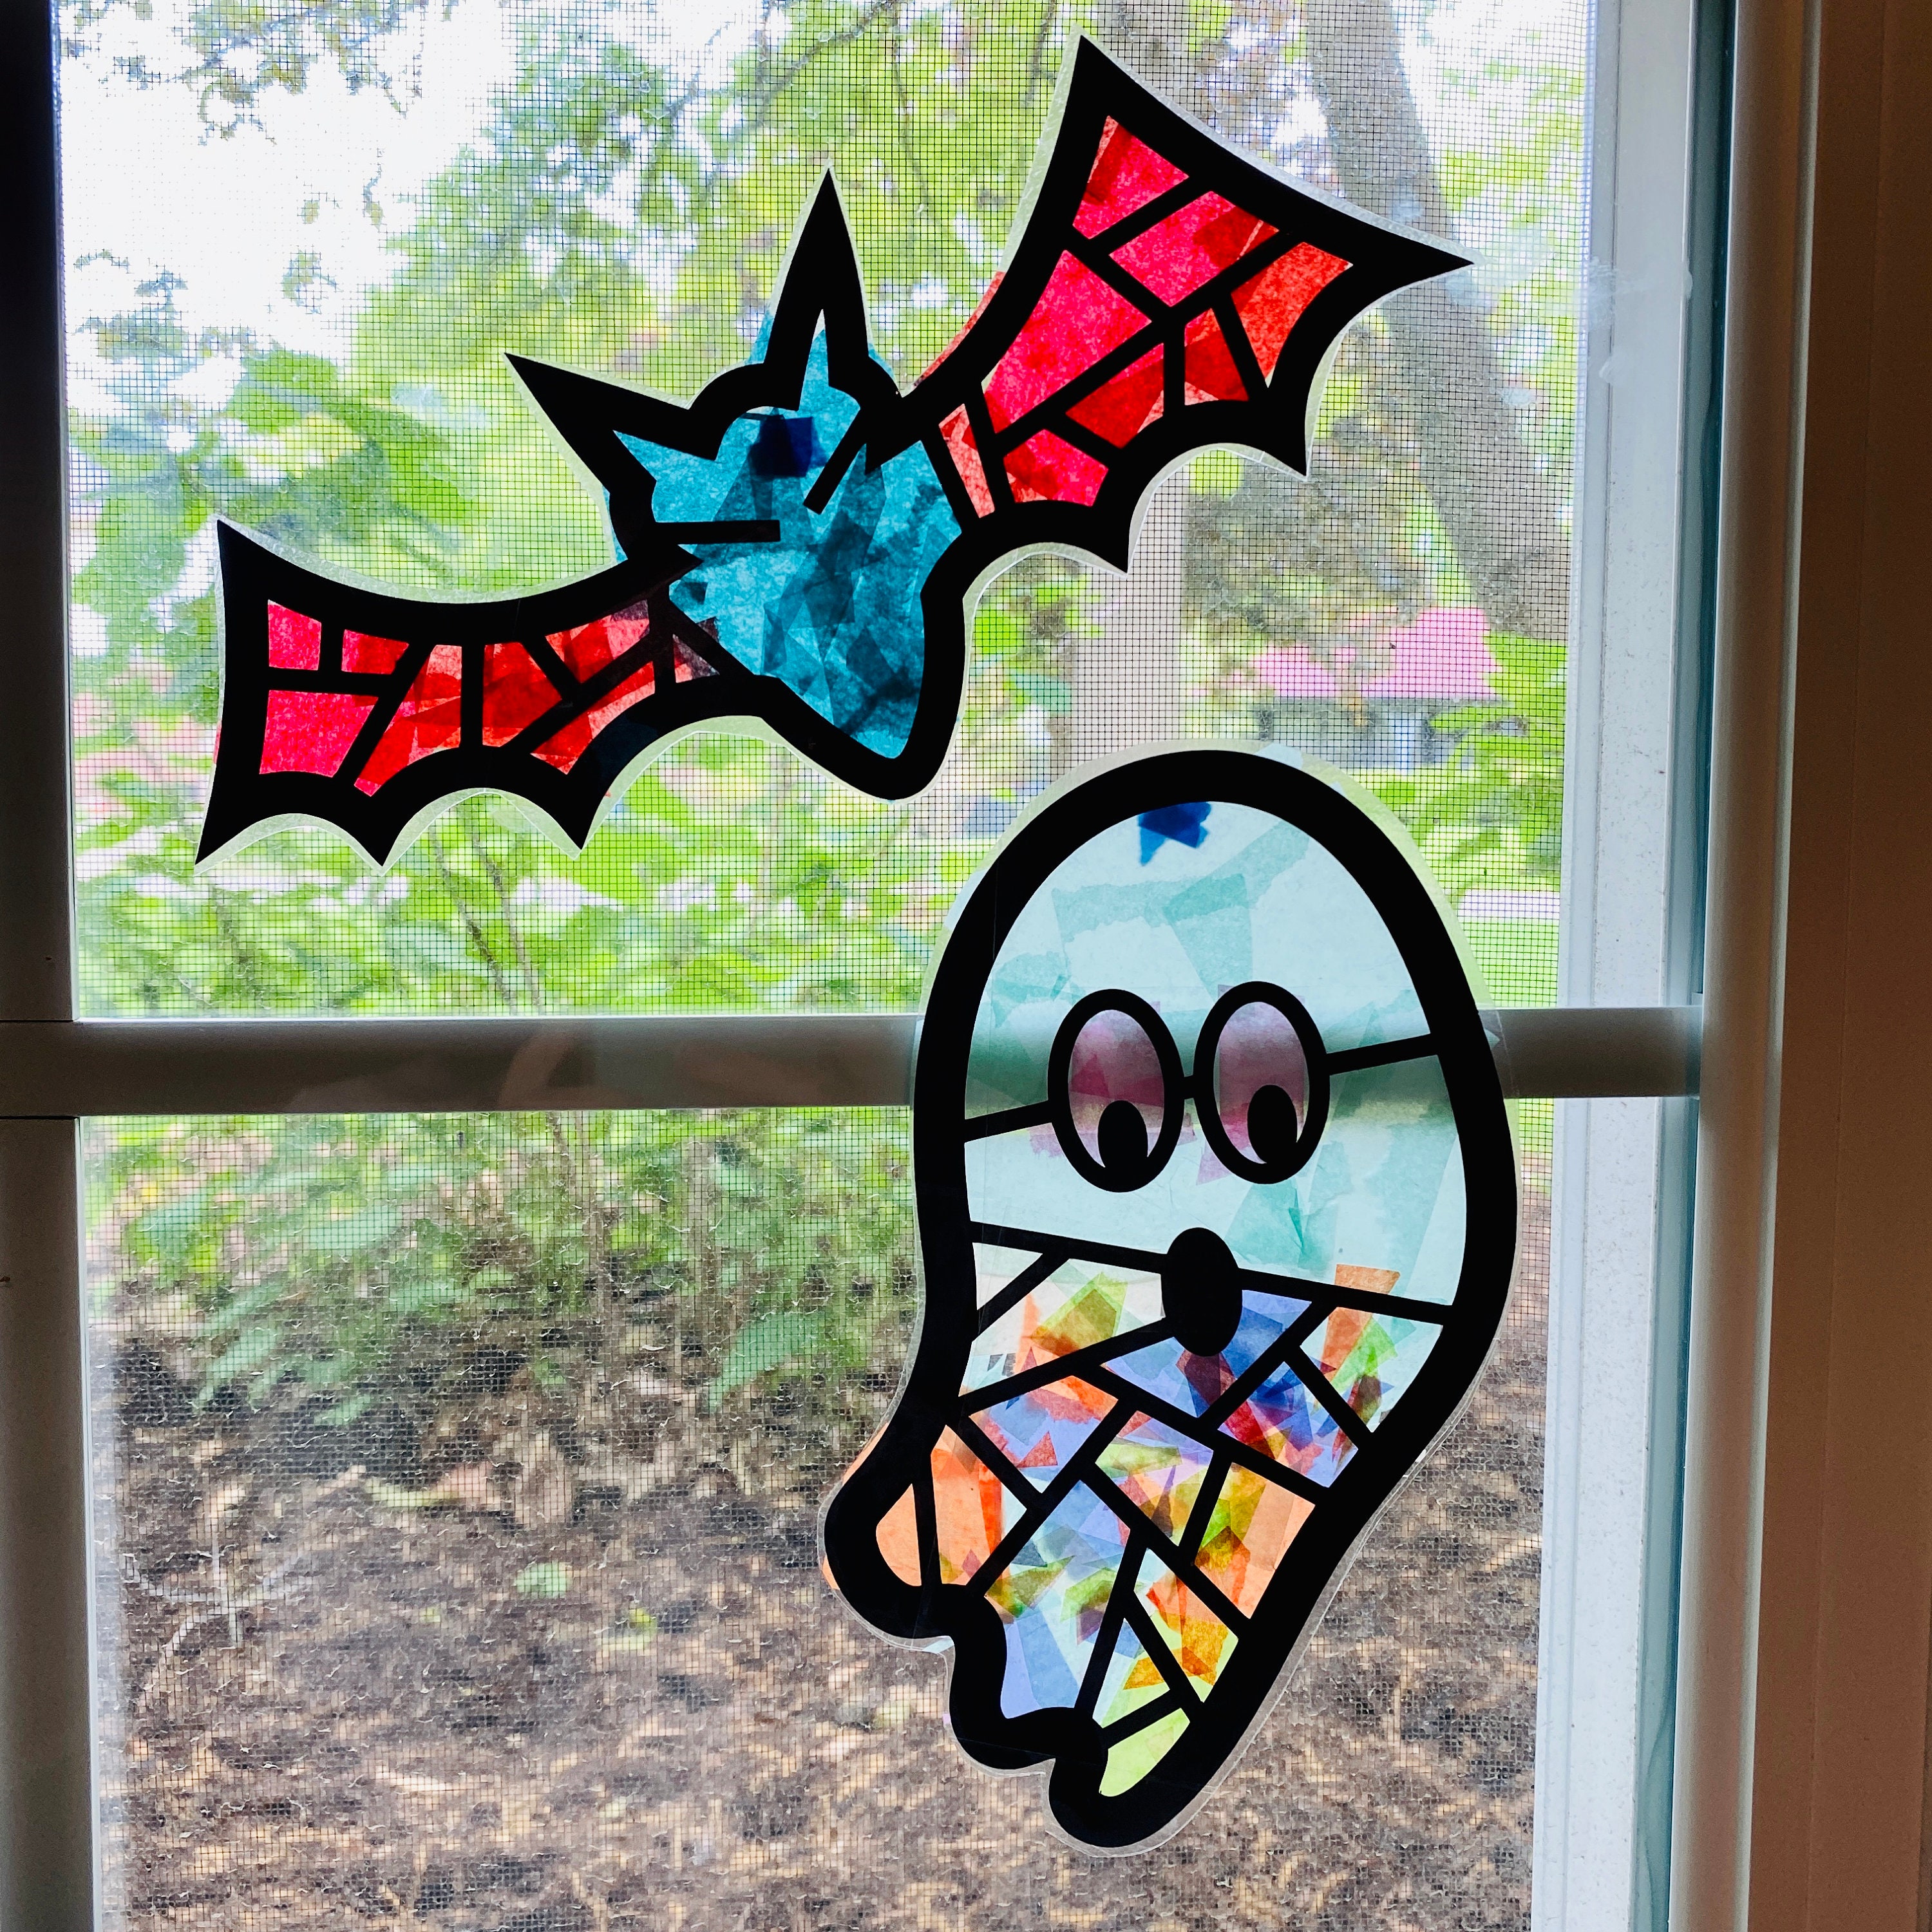 Ghost Suncatcher Crafts Kit – PunchofColor